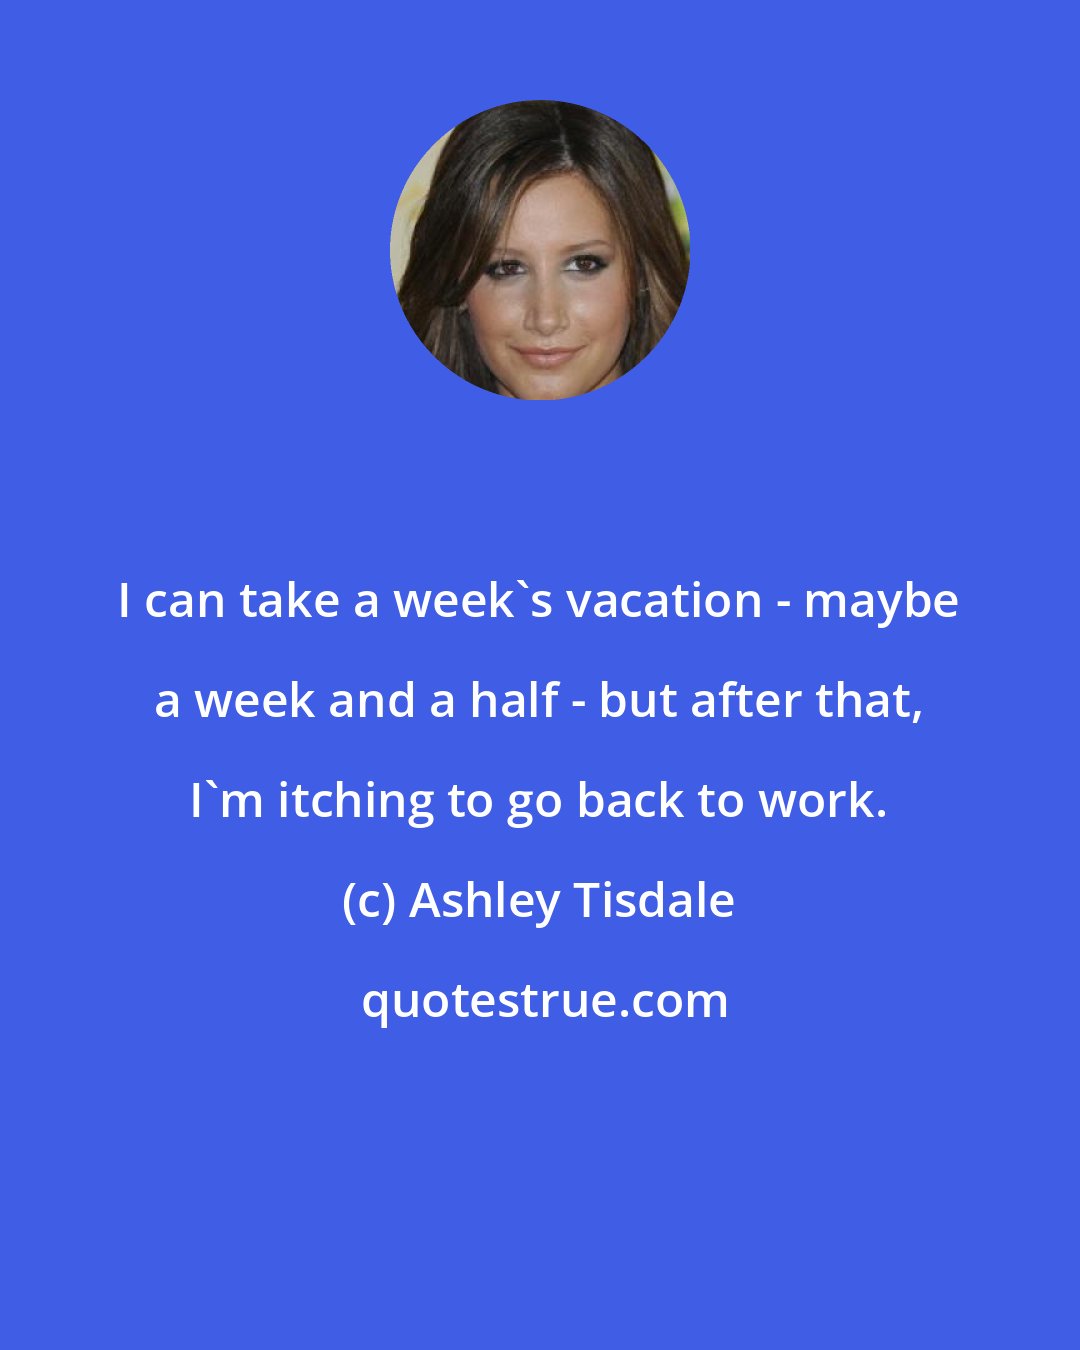 Ashley Tisdale: I can take a week's vacation - maybe a week and a half - but after that, I'm itching to go back to work.